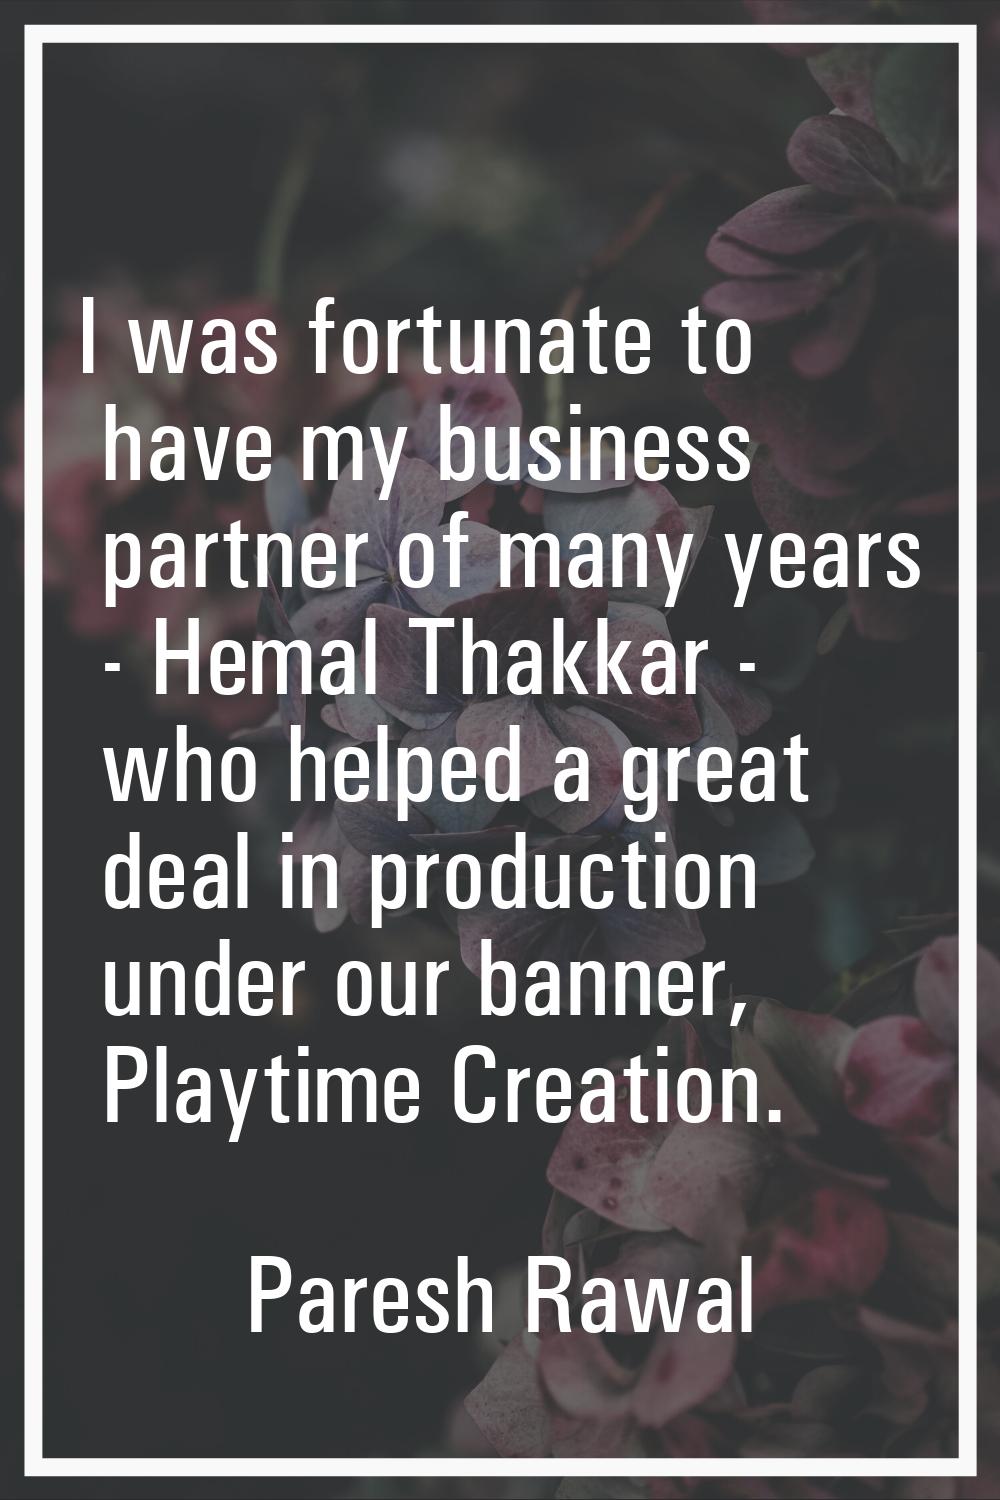 I was fortunate to have my business partner of many years - Hemal Thakkar - who helped a great deal